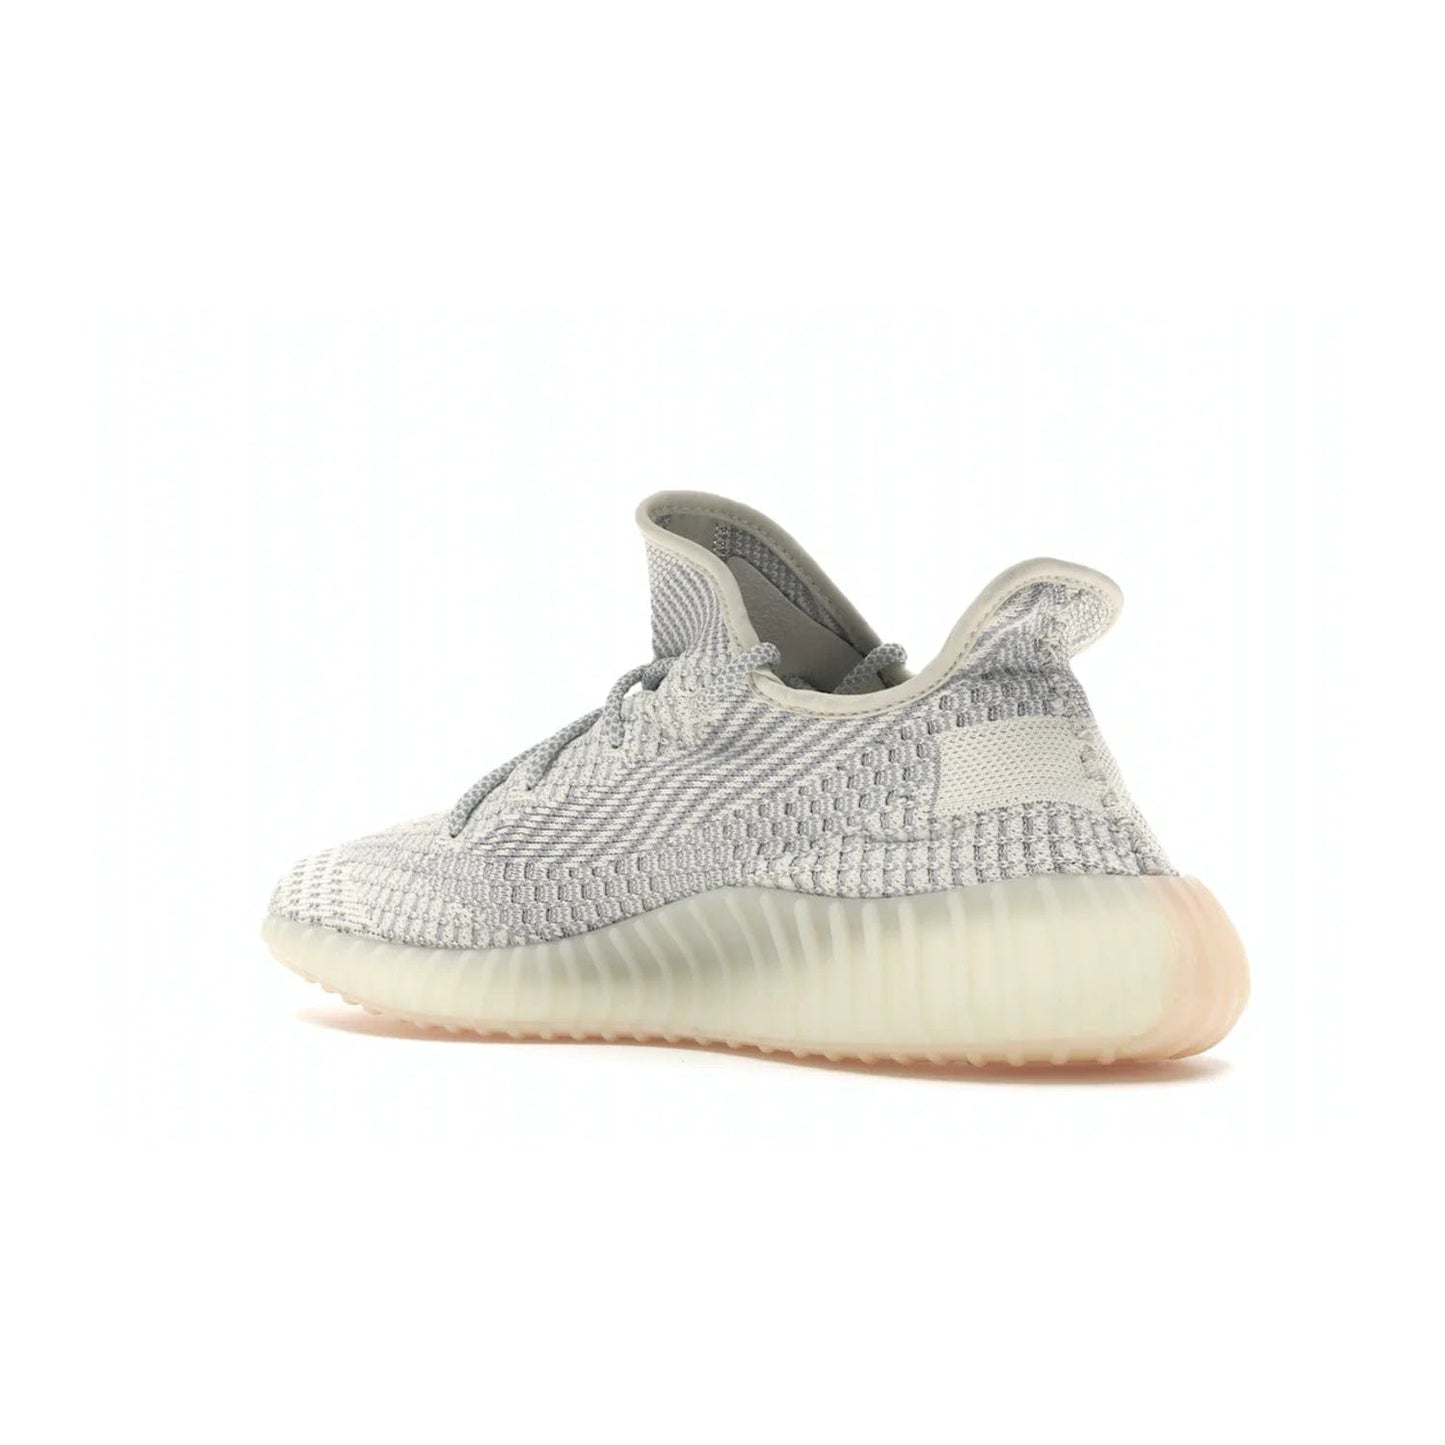 adidas Yeezy Boost 350 V2 Lundmark (Non Reflective) - Image 23 - Only at www.BallersClubKickz.com - Shop the exclusive adidas Yeezy Boost 350 V2 Lundmark with a subtle summer color, mesh upper, white-to-cream transitional midsole, light tan outsole, and pink middle stripe. Comfort and style come together in this perfect summer 350 V2. Released on July 11, 2019.